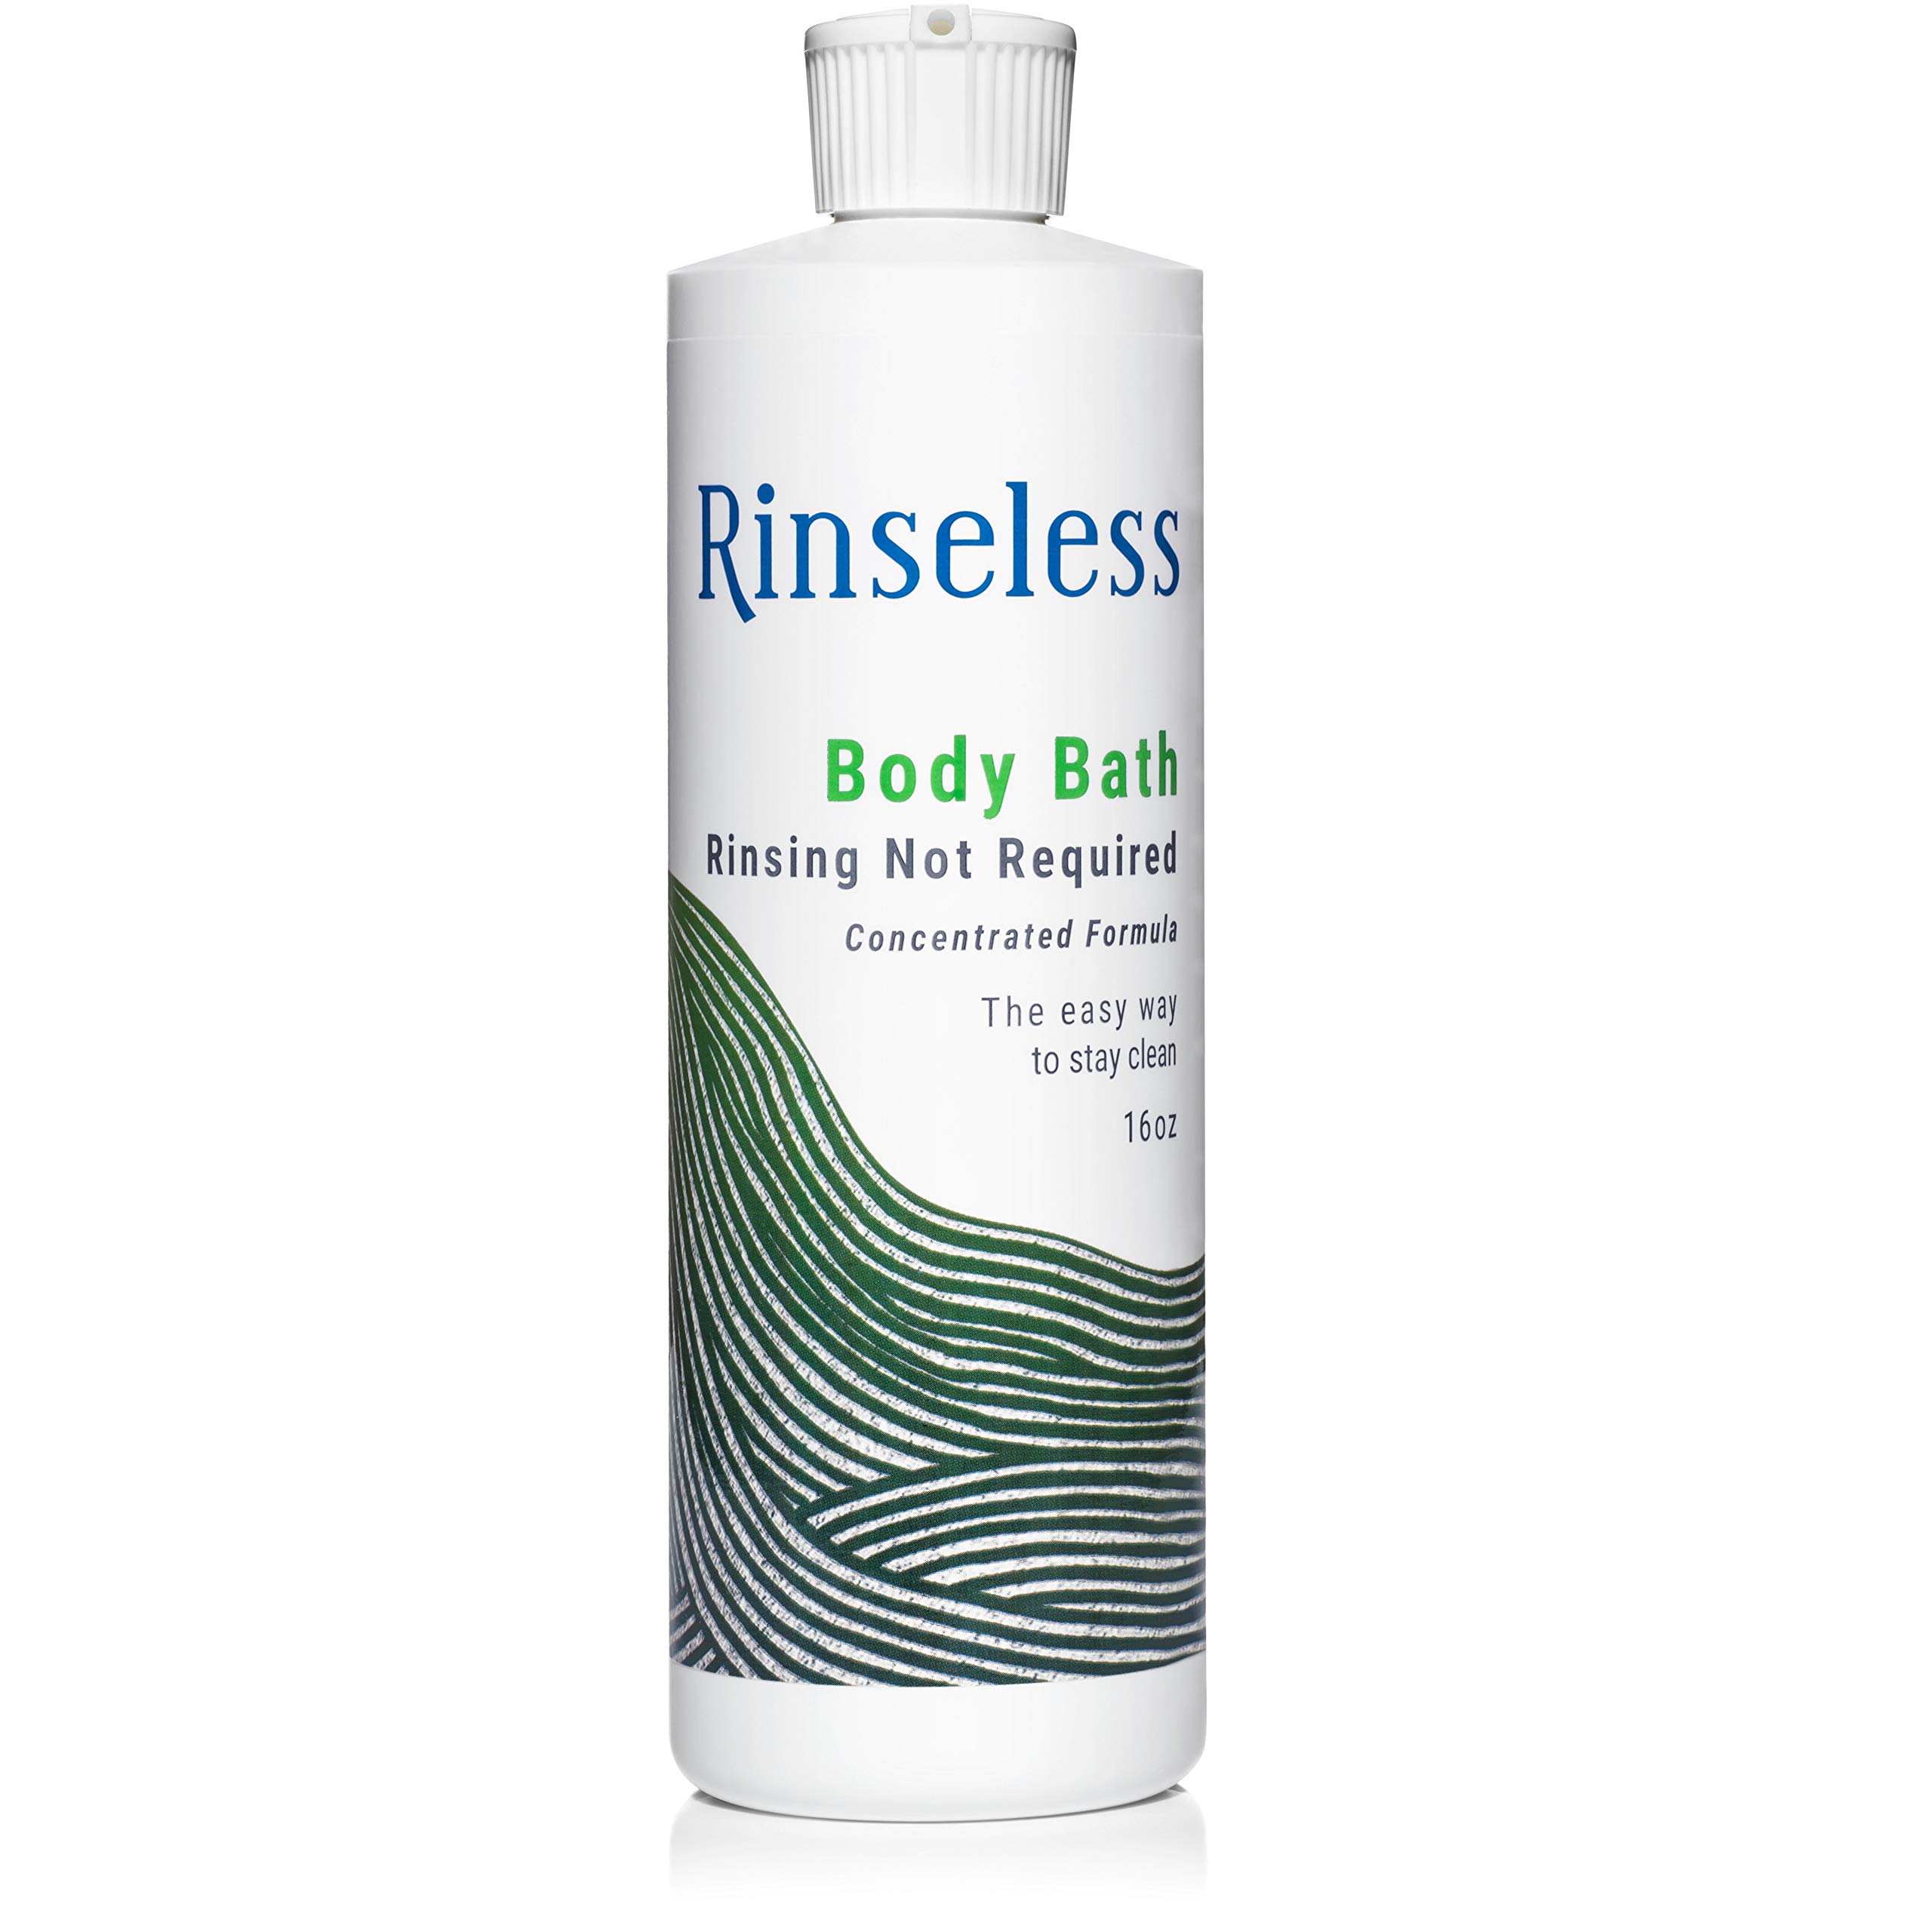 Rinseless Waterless Body Bath Wash 16 Oz  No Water Rinse Needed  Concentrated Formula Makes 16